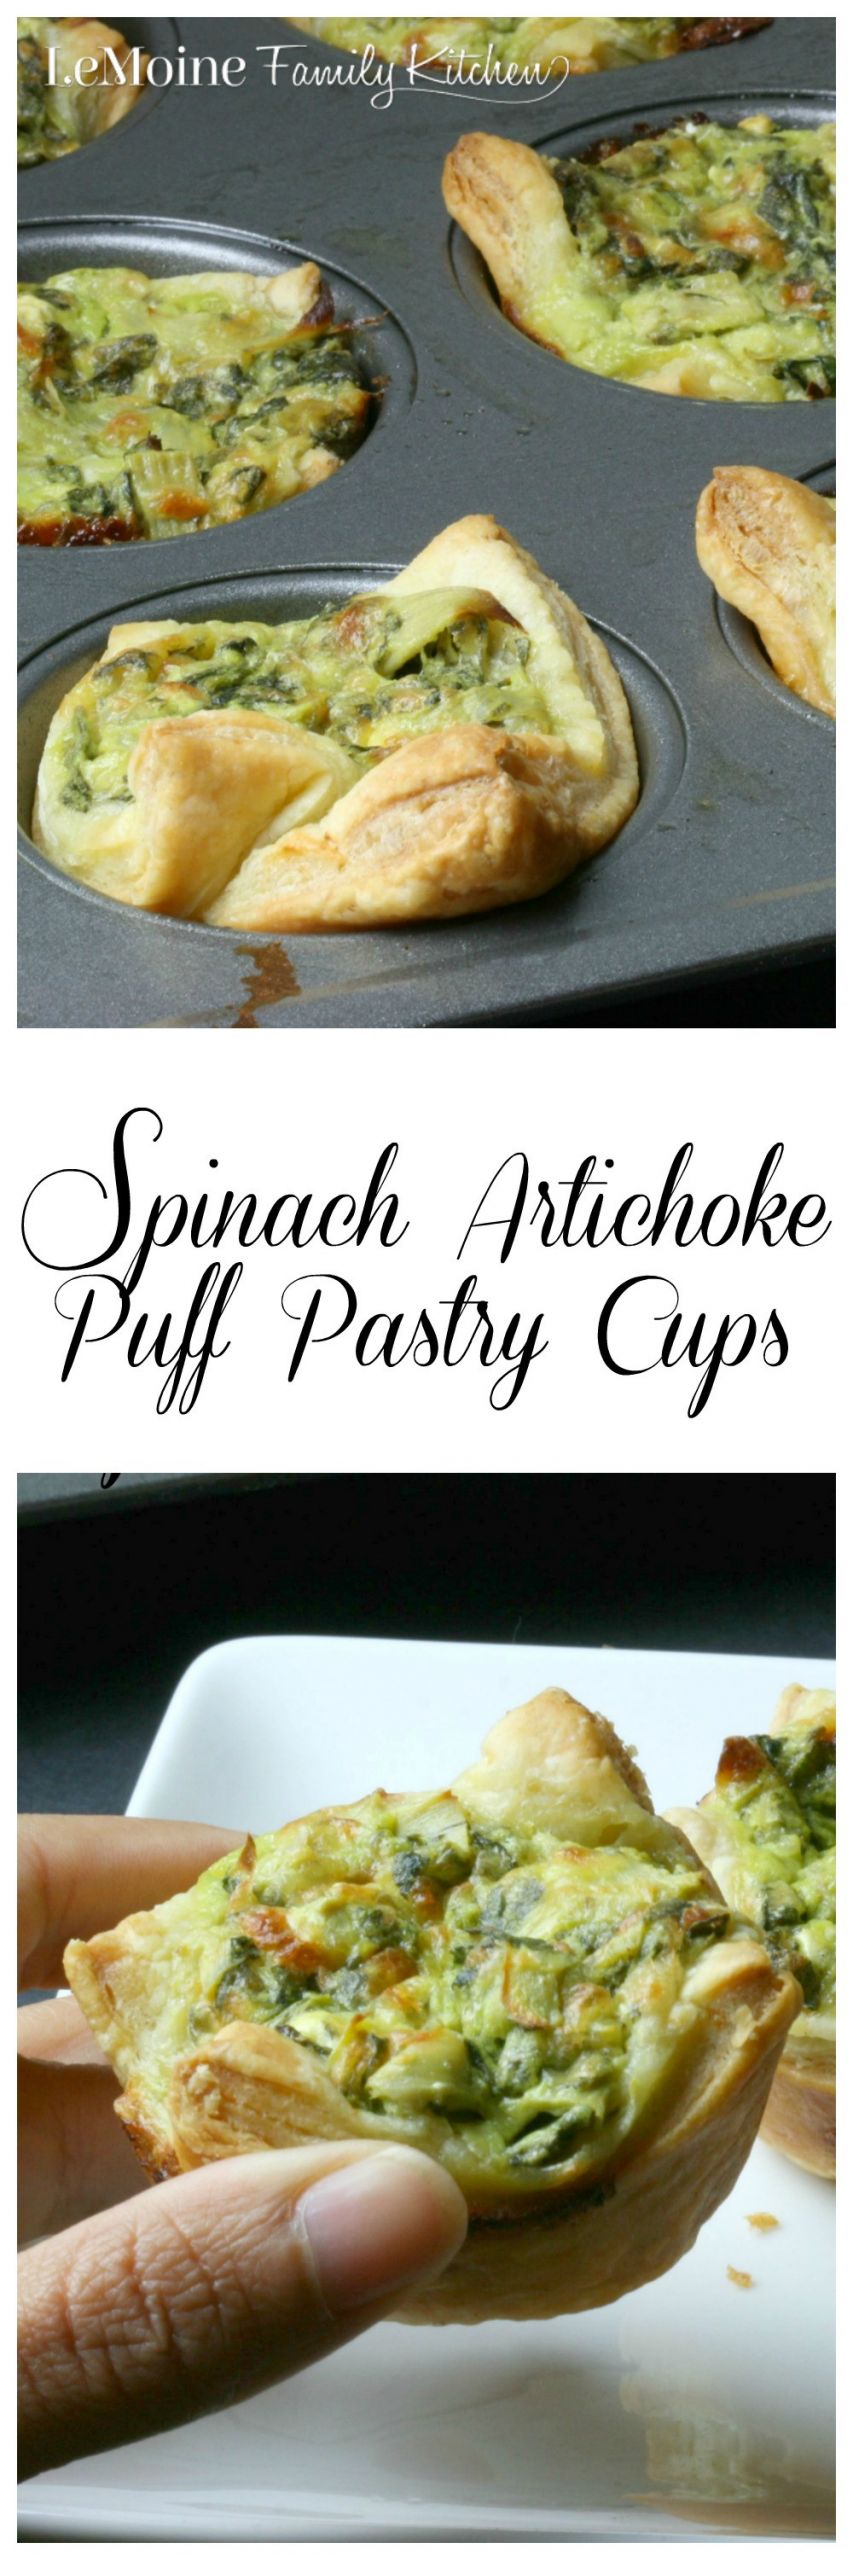 Puff Pastry Cup Appetizers
 Spinach Artichoke Puff Pastry Cups LeMoine Family Kitchen